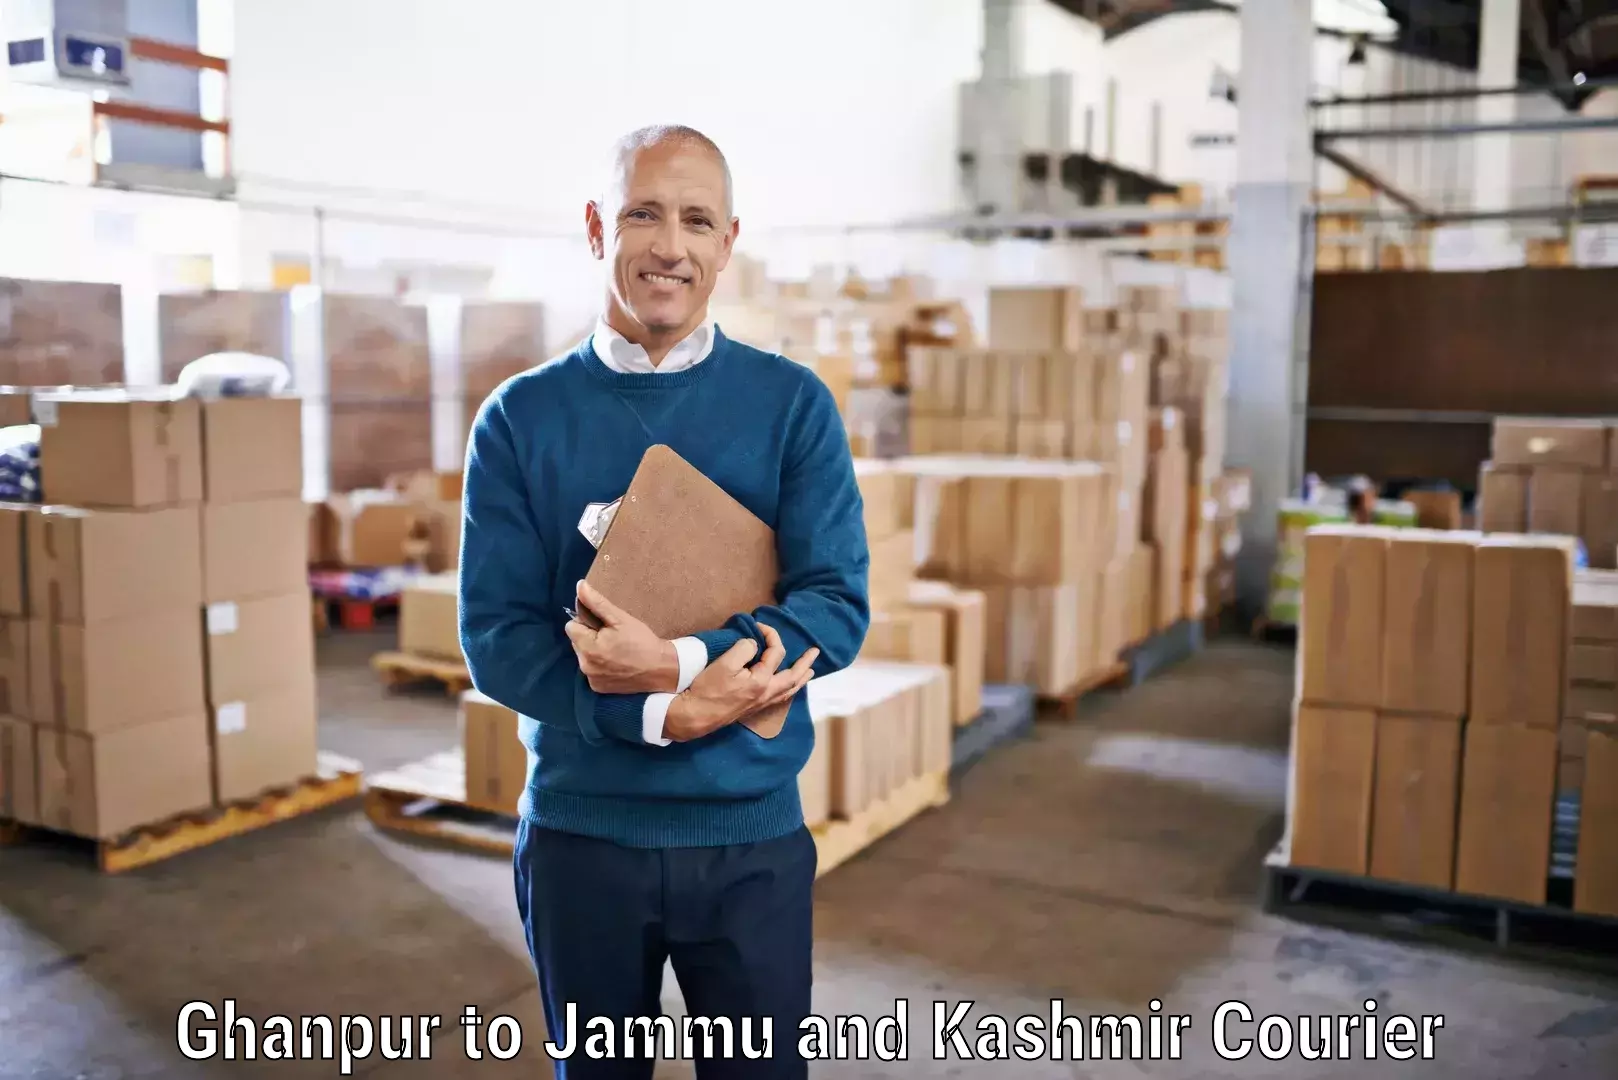 Bulk courier orders Ghanpur to Rajouri